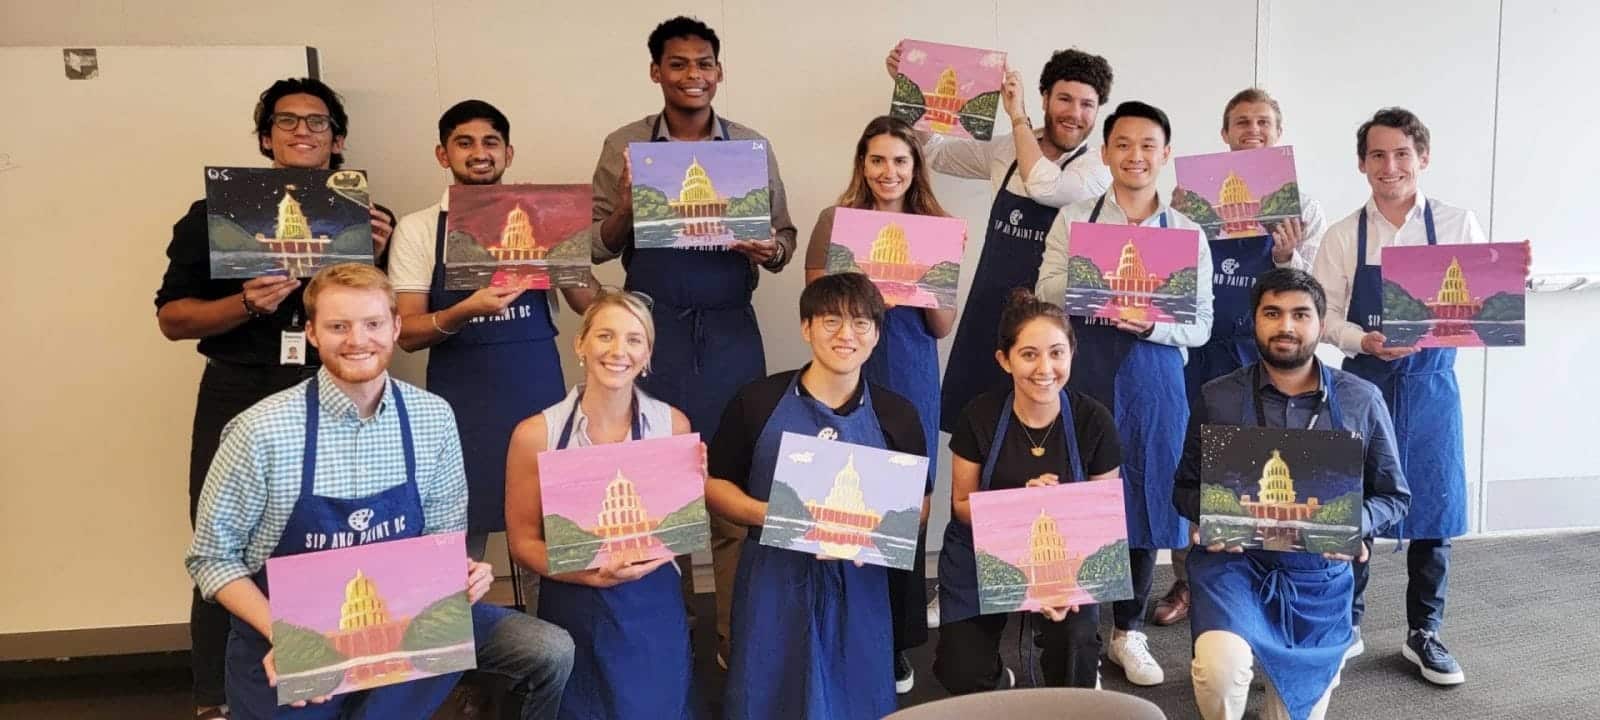 A group of people attending a DC Paint and Sip event, showcasing their painting in an office setting